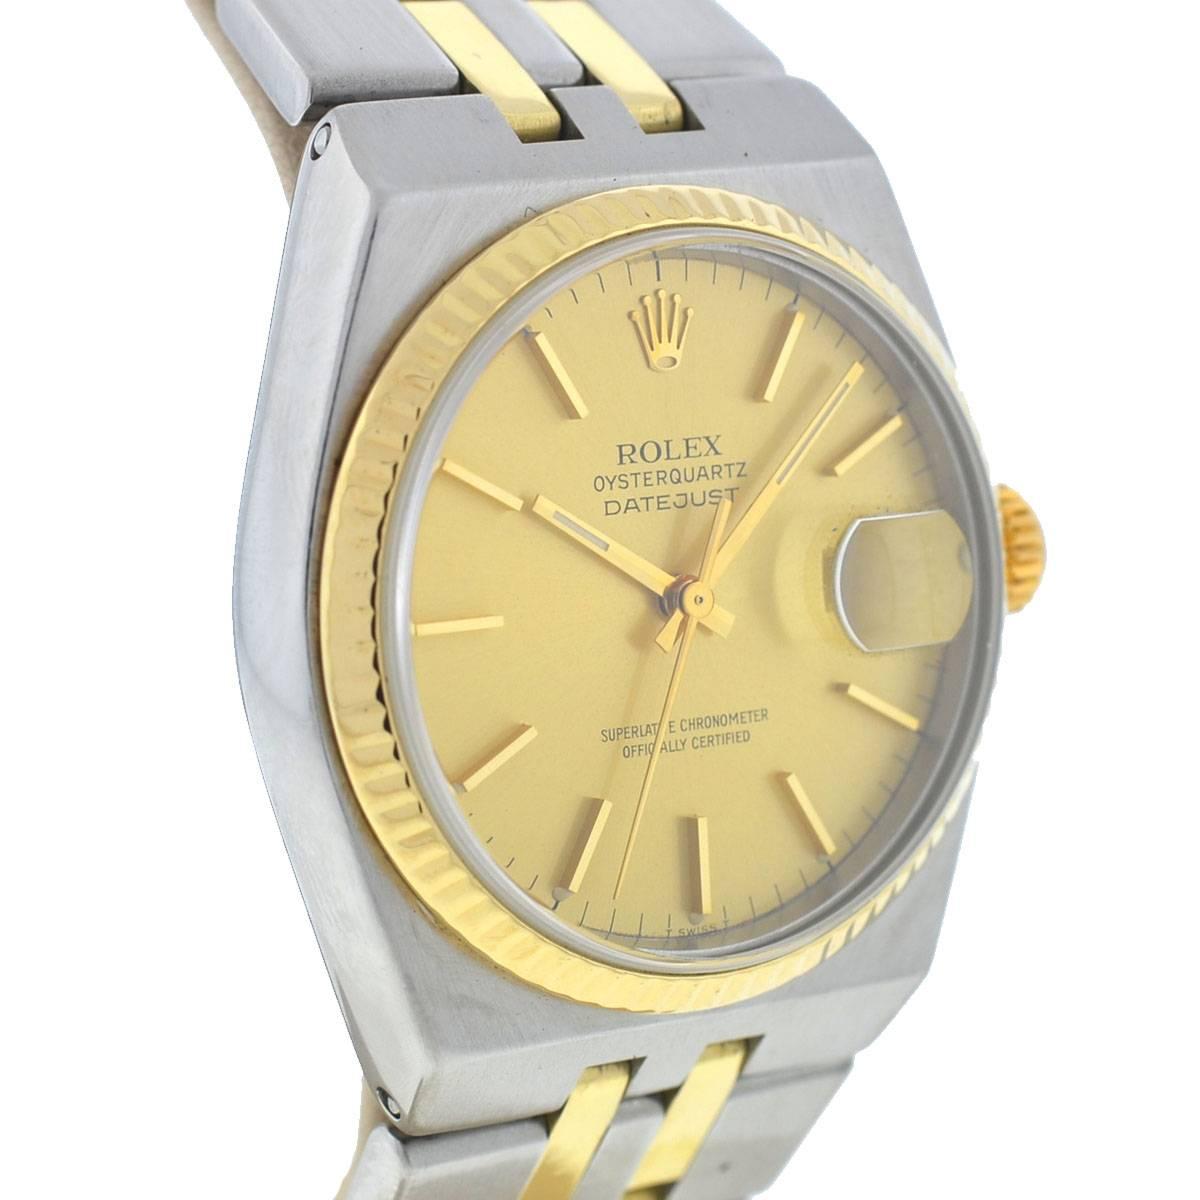 Company - Rolex
Model - Datejust 17013
Case Metal - Stainless Steel
Case Measurement - 36mm
Bracelet - Stainless Steel / 18k Yellow Gold
Dial - Champagne 
Bezel - Yellow Gold Fluted
Crystal - Scratch Resistant Sapphire
Movement - Quartz
Features -